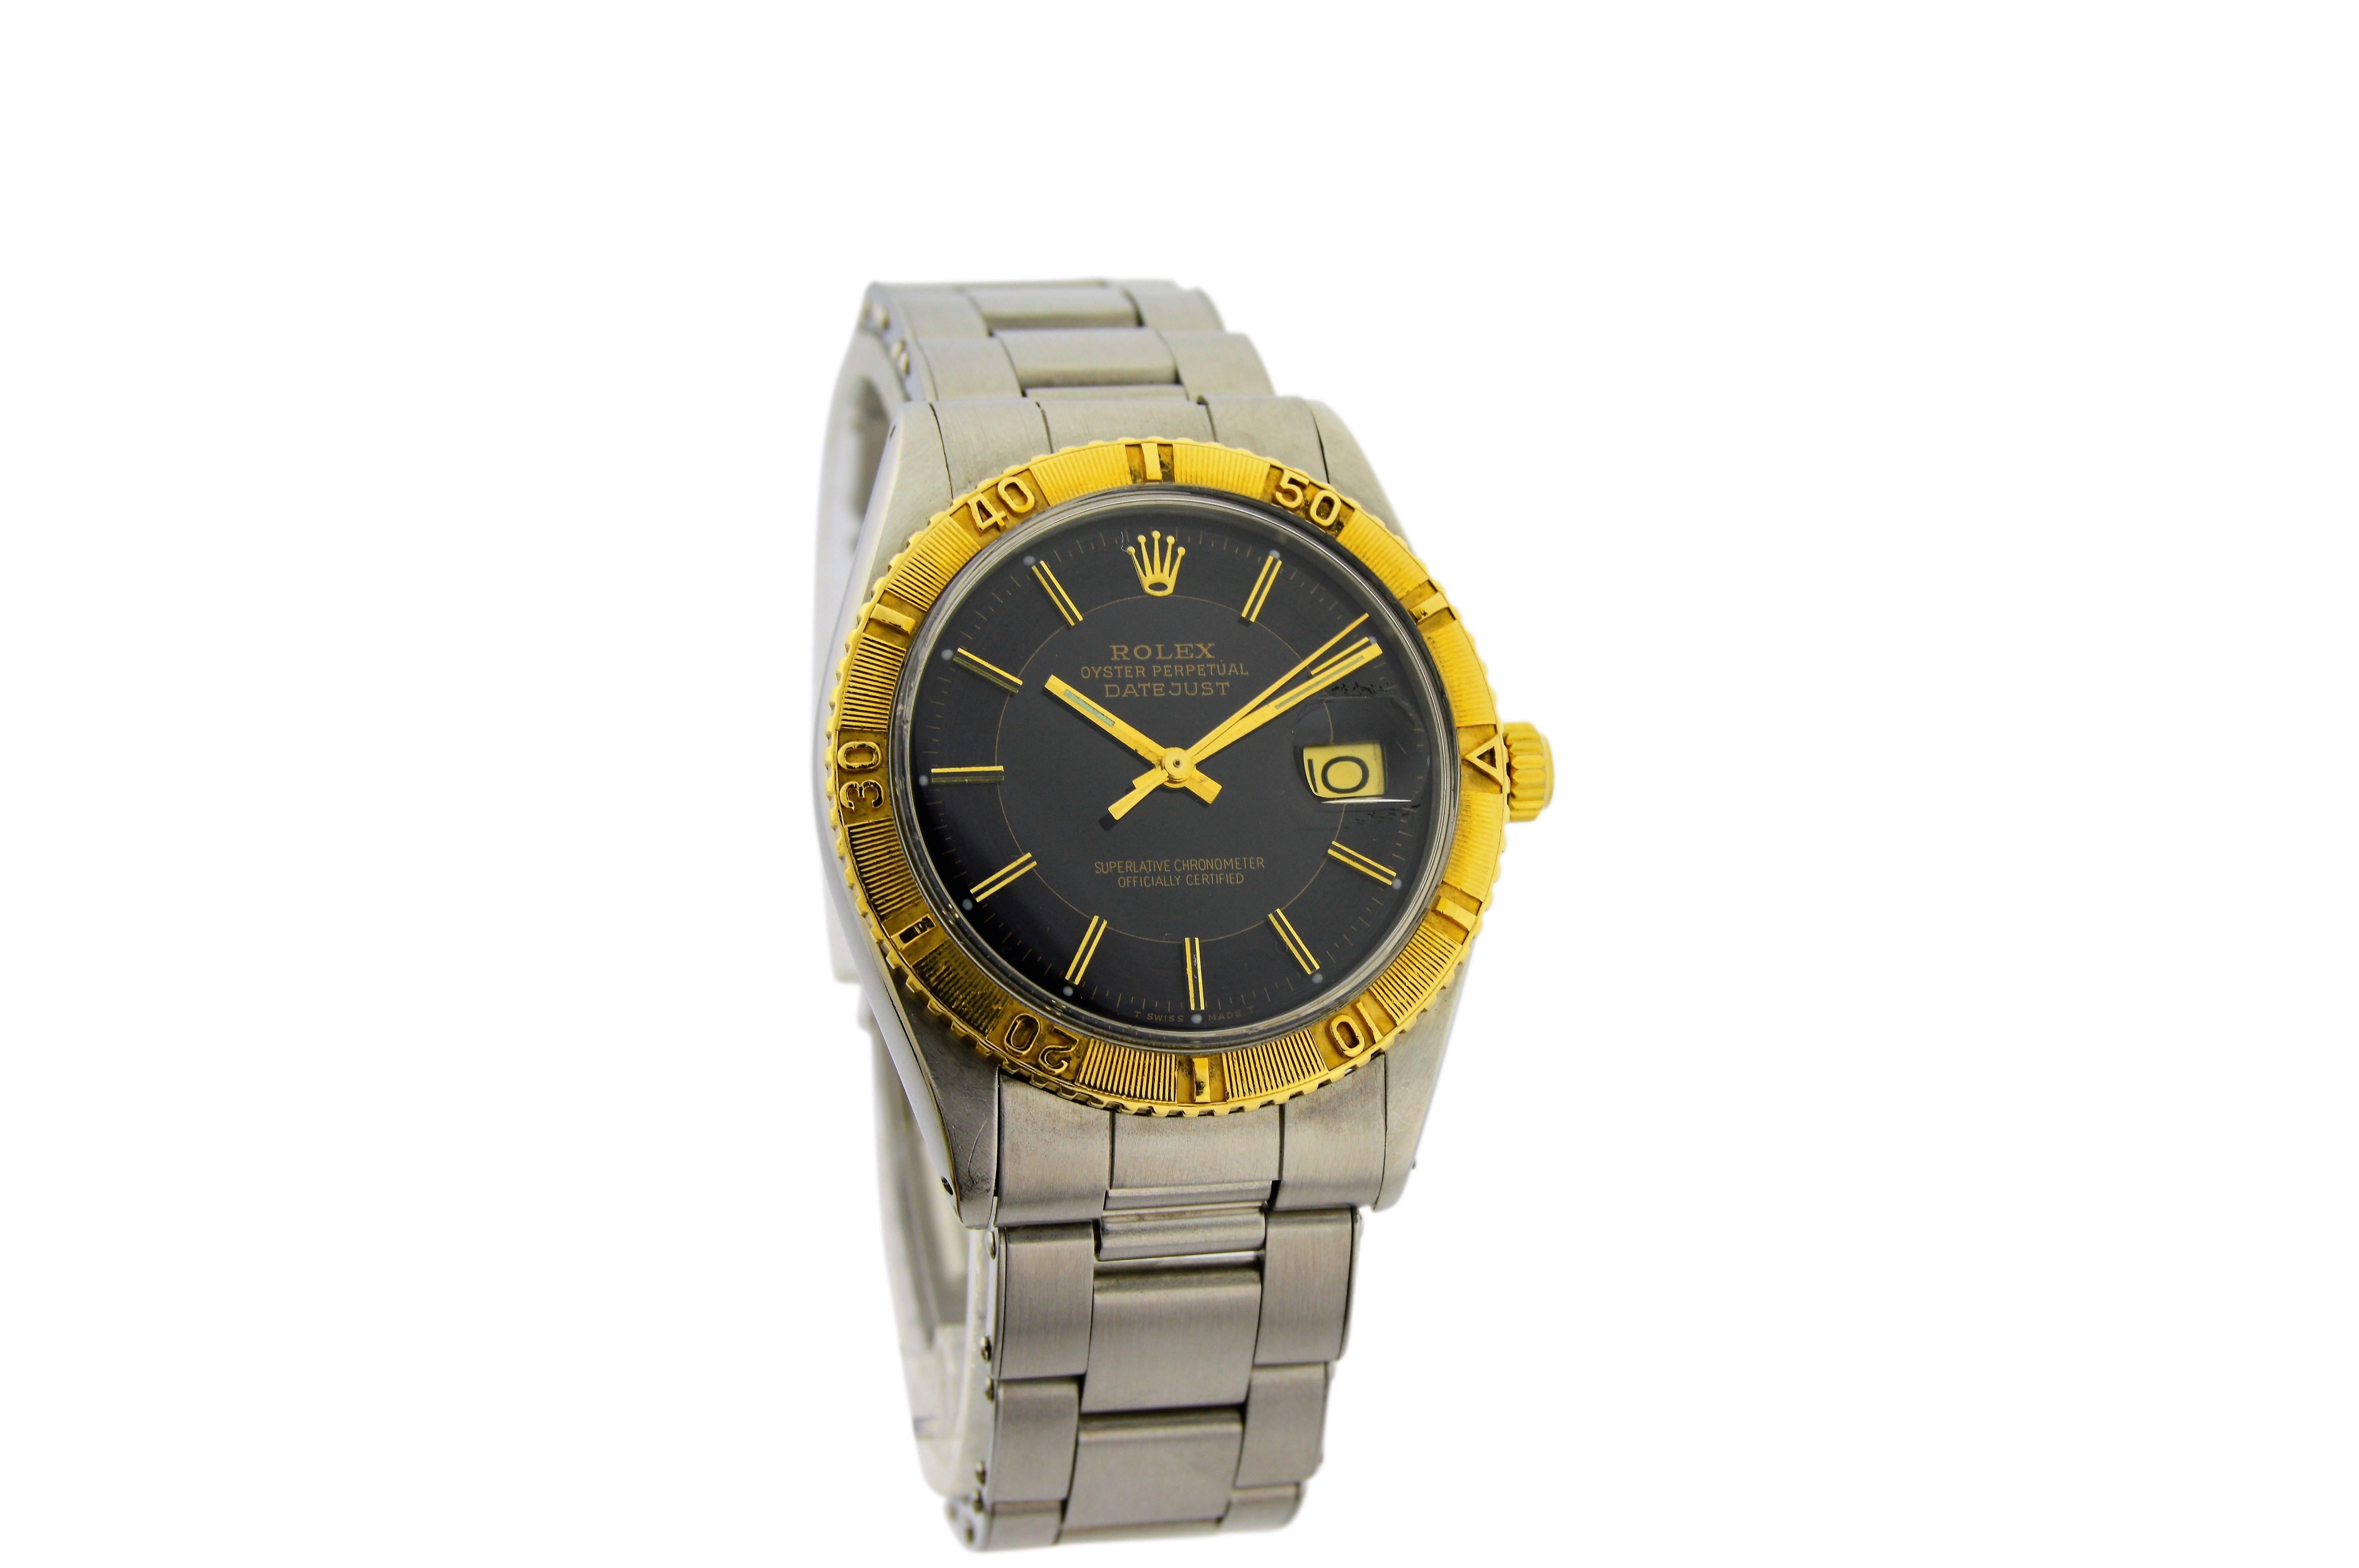 FACTORY / HOUSE: Rolex Watch Company
STYLE / REFERENCE: Datejust / Ref. 1625
METAL / MATERIAL: Stainless Steel and 14Kt. Yellow Gold
DIMENSIONS:  42mm X 36mm
CIRCA: 1971 / 1972
MOVEMENT / CALIBER: Perpetual Winding / 26 Jewels / Cal. 1570
DIAL /